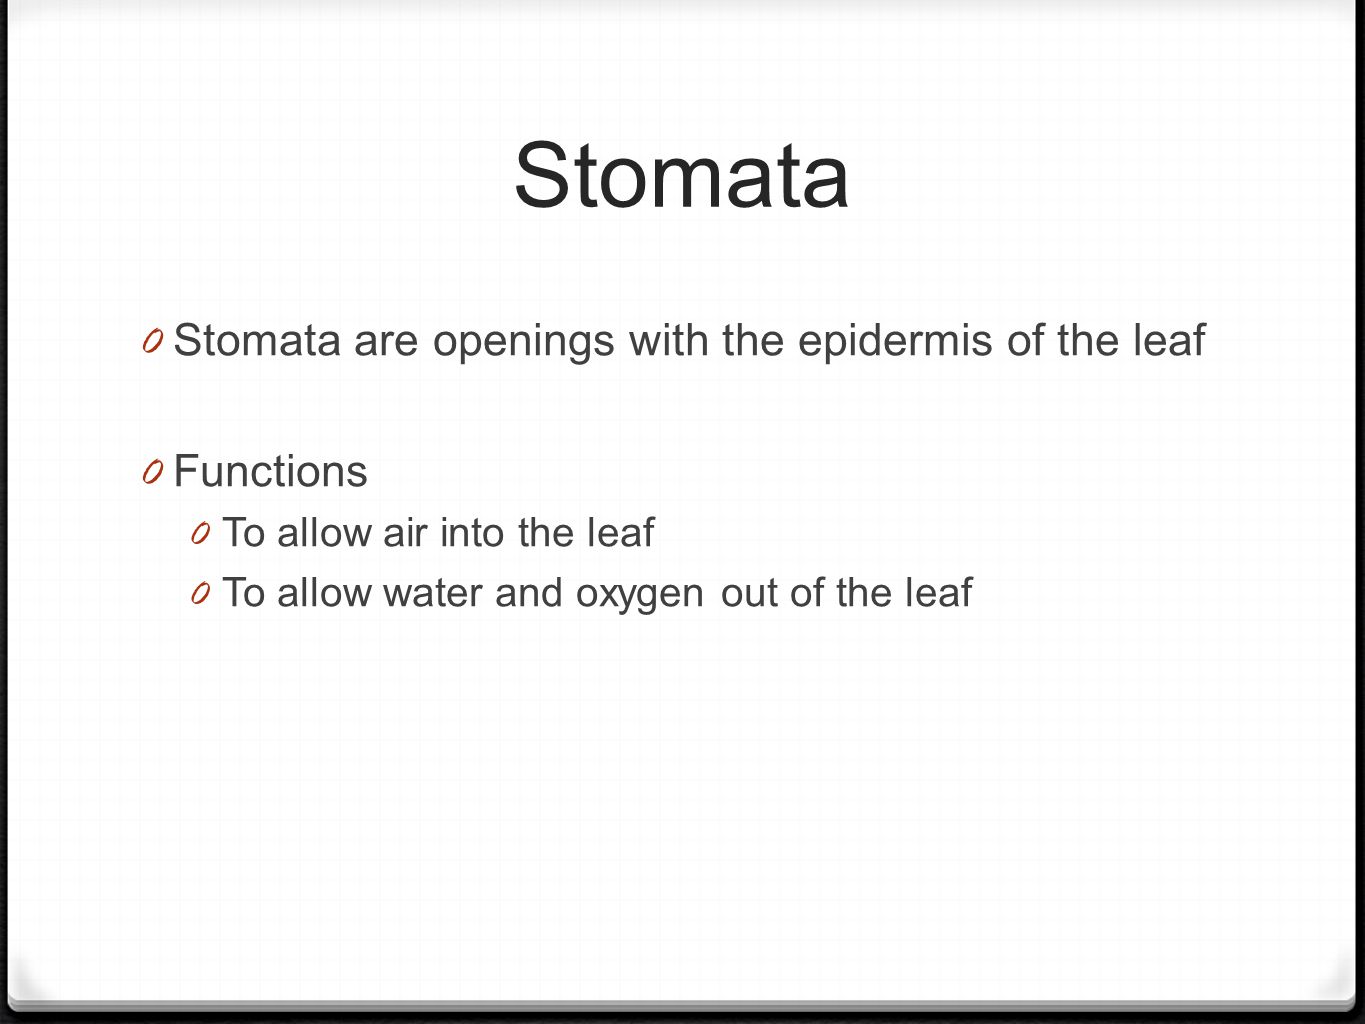 Stomata 0 Stomata are openings with the epidermis of the leaf 0 Functions 0 To allow air into the leaf 0 To allow water and oxygen out of the leaf